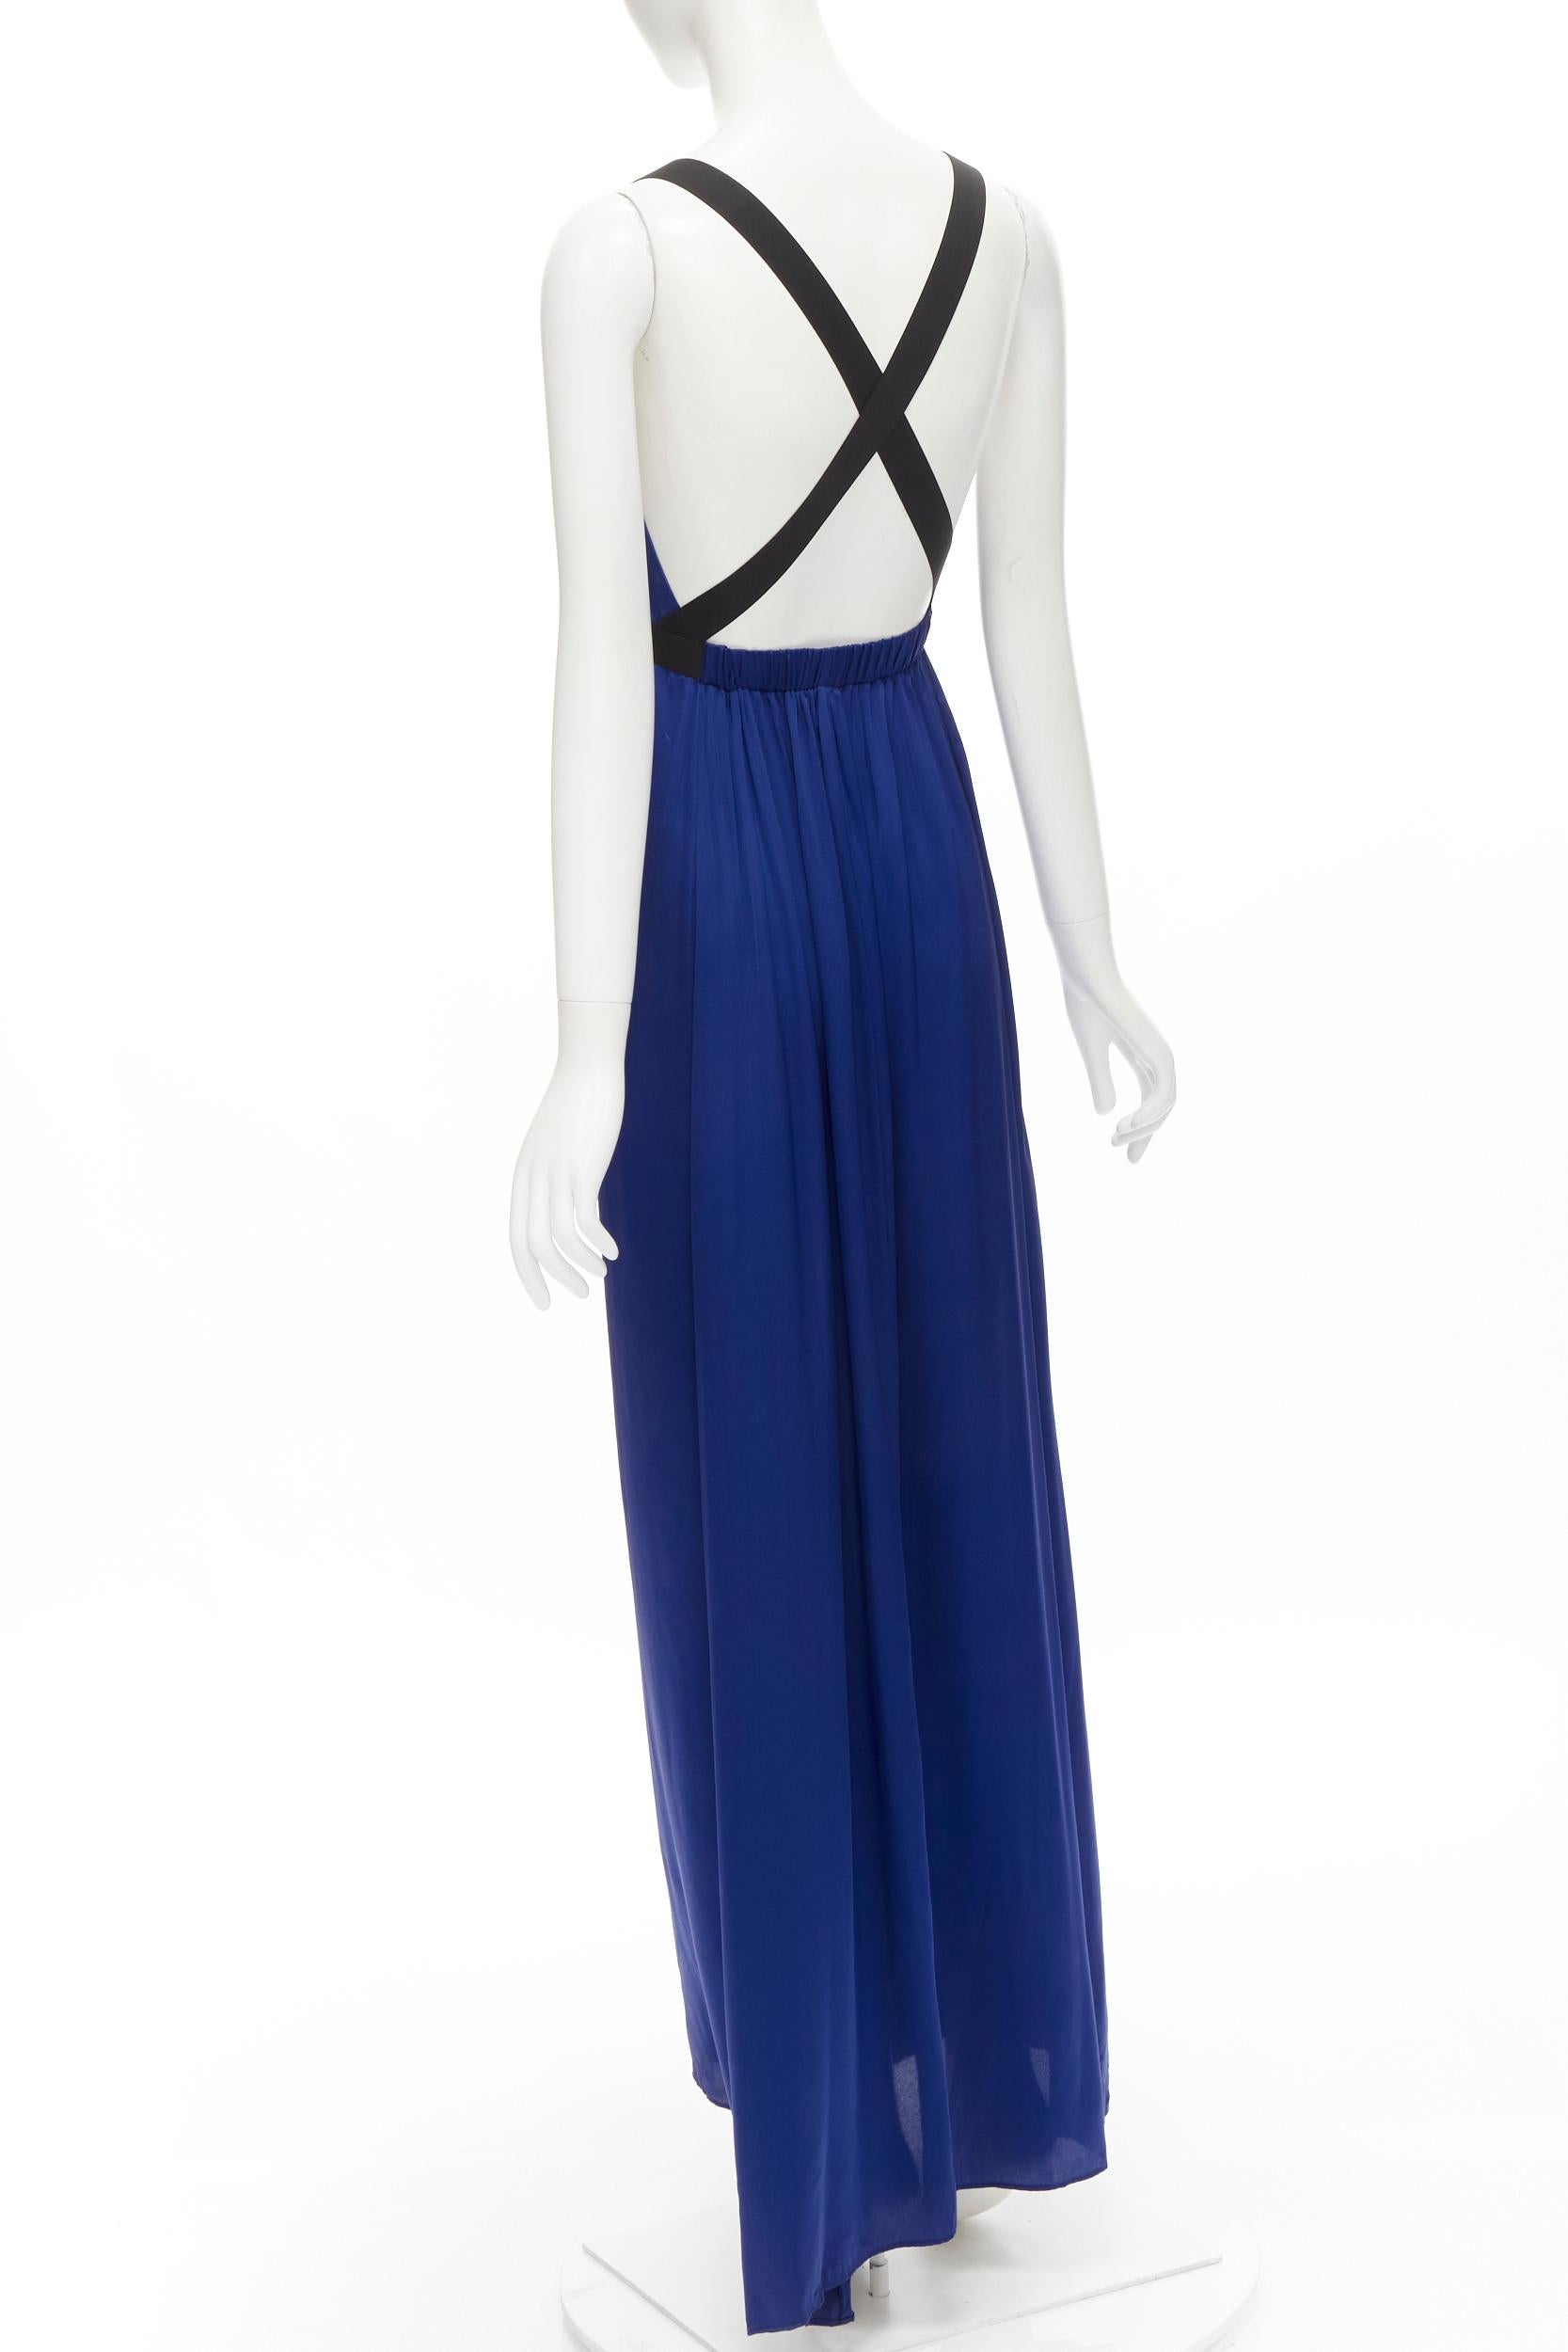 THEORY cobalt blue 100% silk black elastic cross band open. back maxi dress XS 
Reference: TACW/A00032 
Brand: Theory 
Material: Silk 
Color: Blue 
Pattern: Solid 
Extra Detail: Elastic shoulder strap crosses ac back. Open back. 
Made in: China